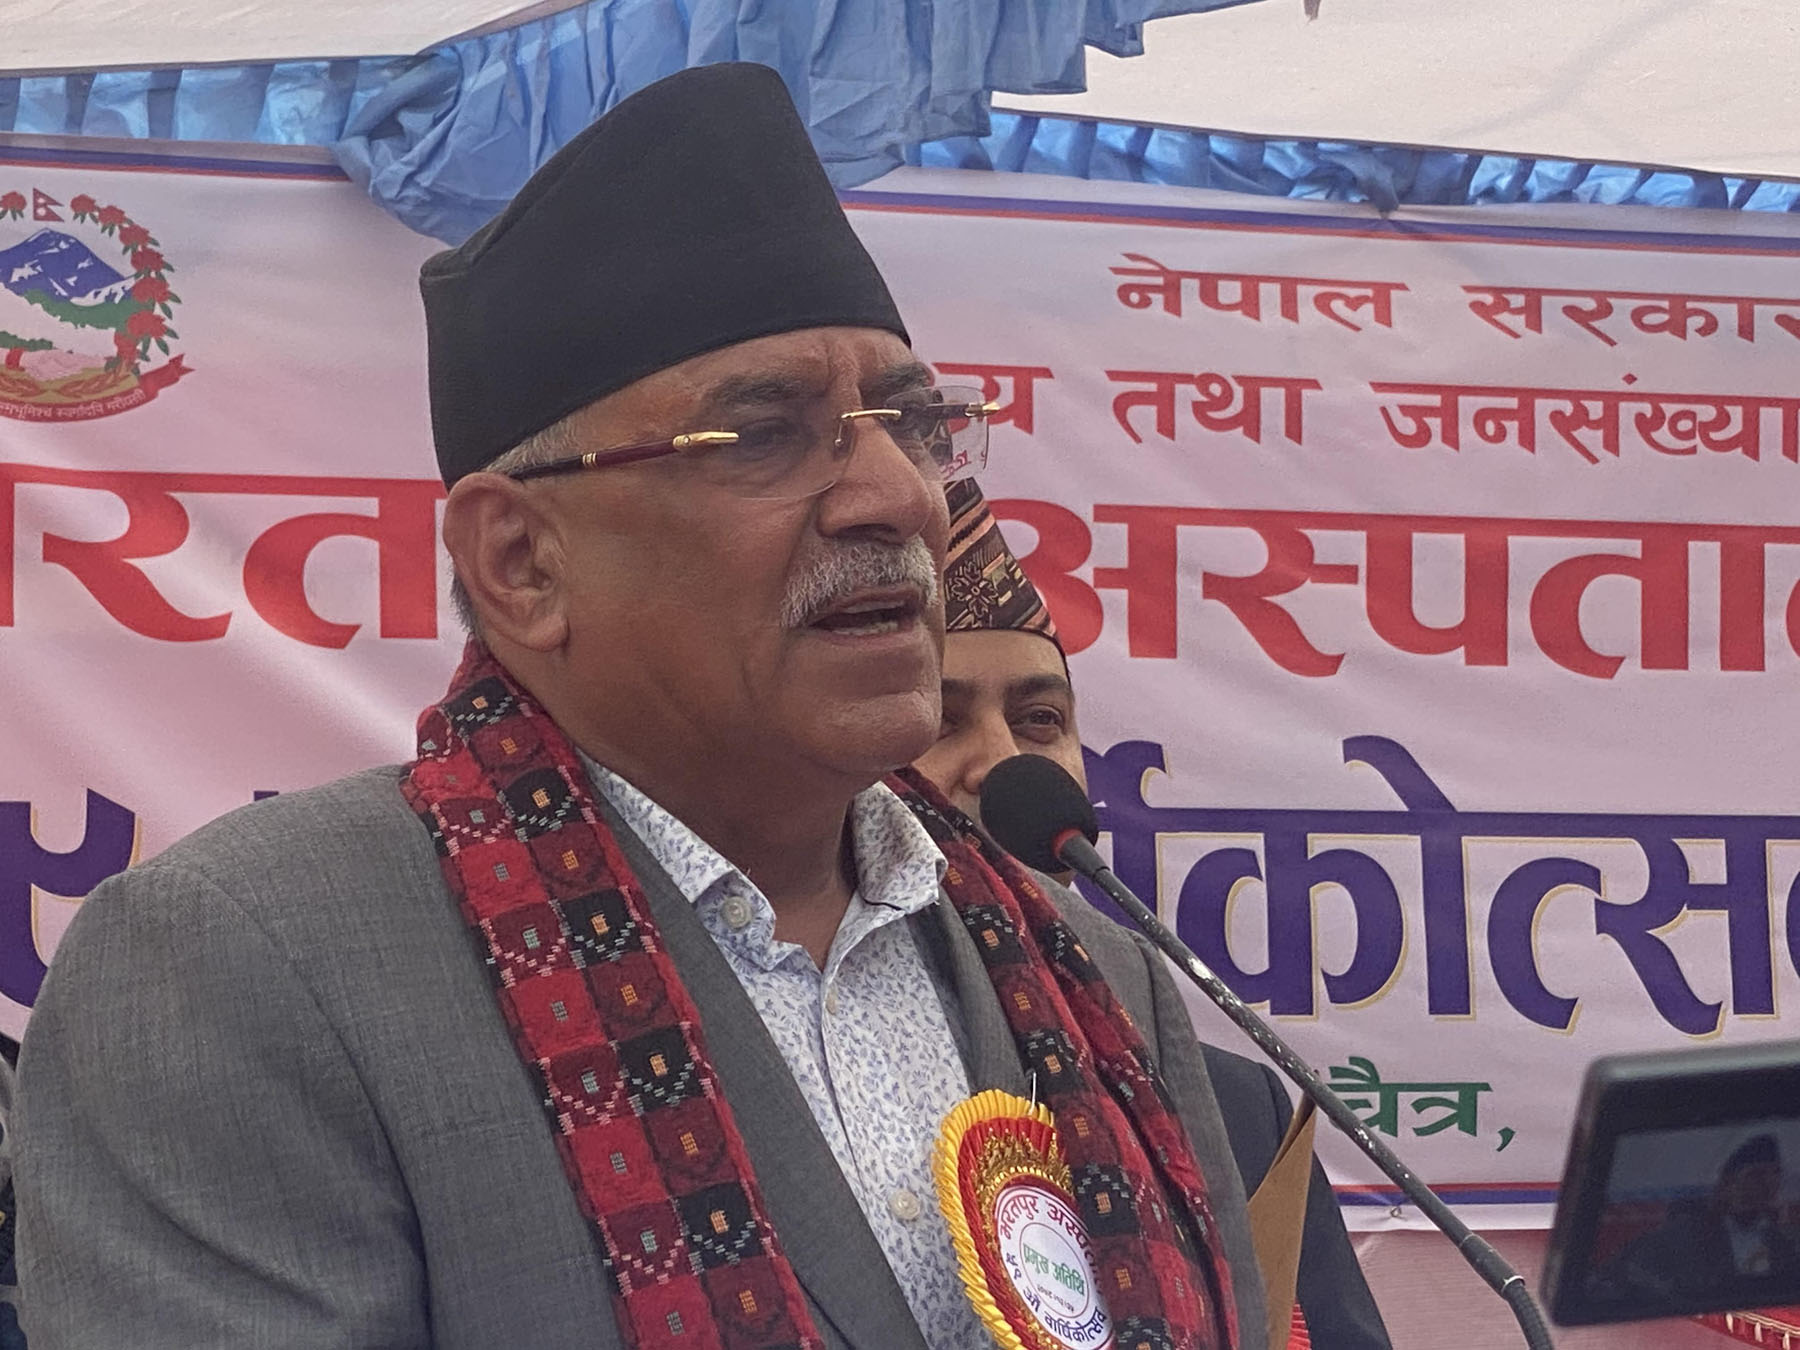 Electoral alliance to be forged in all places: Prachanda